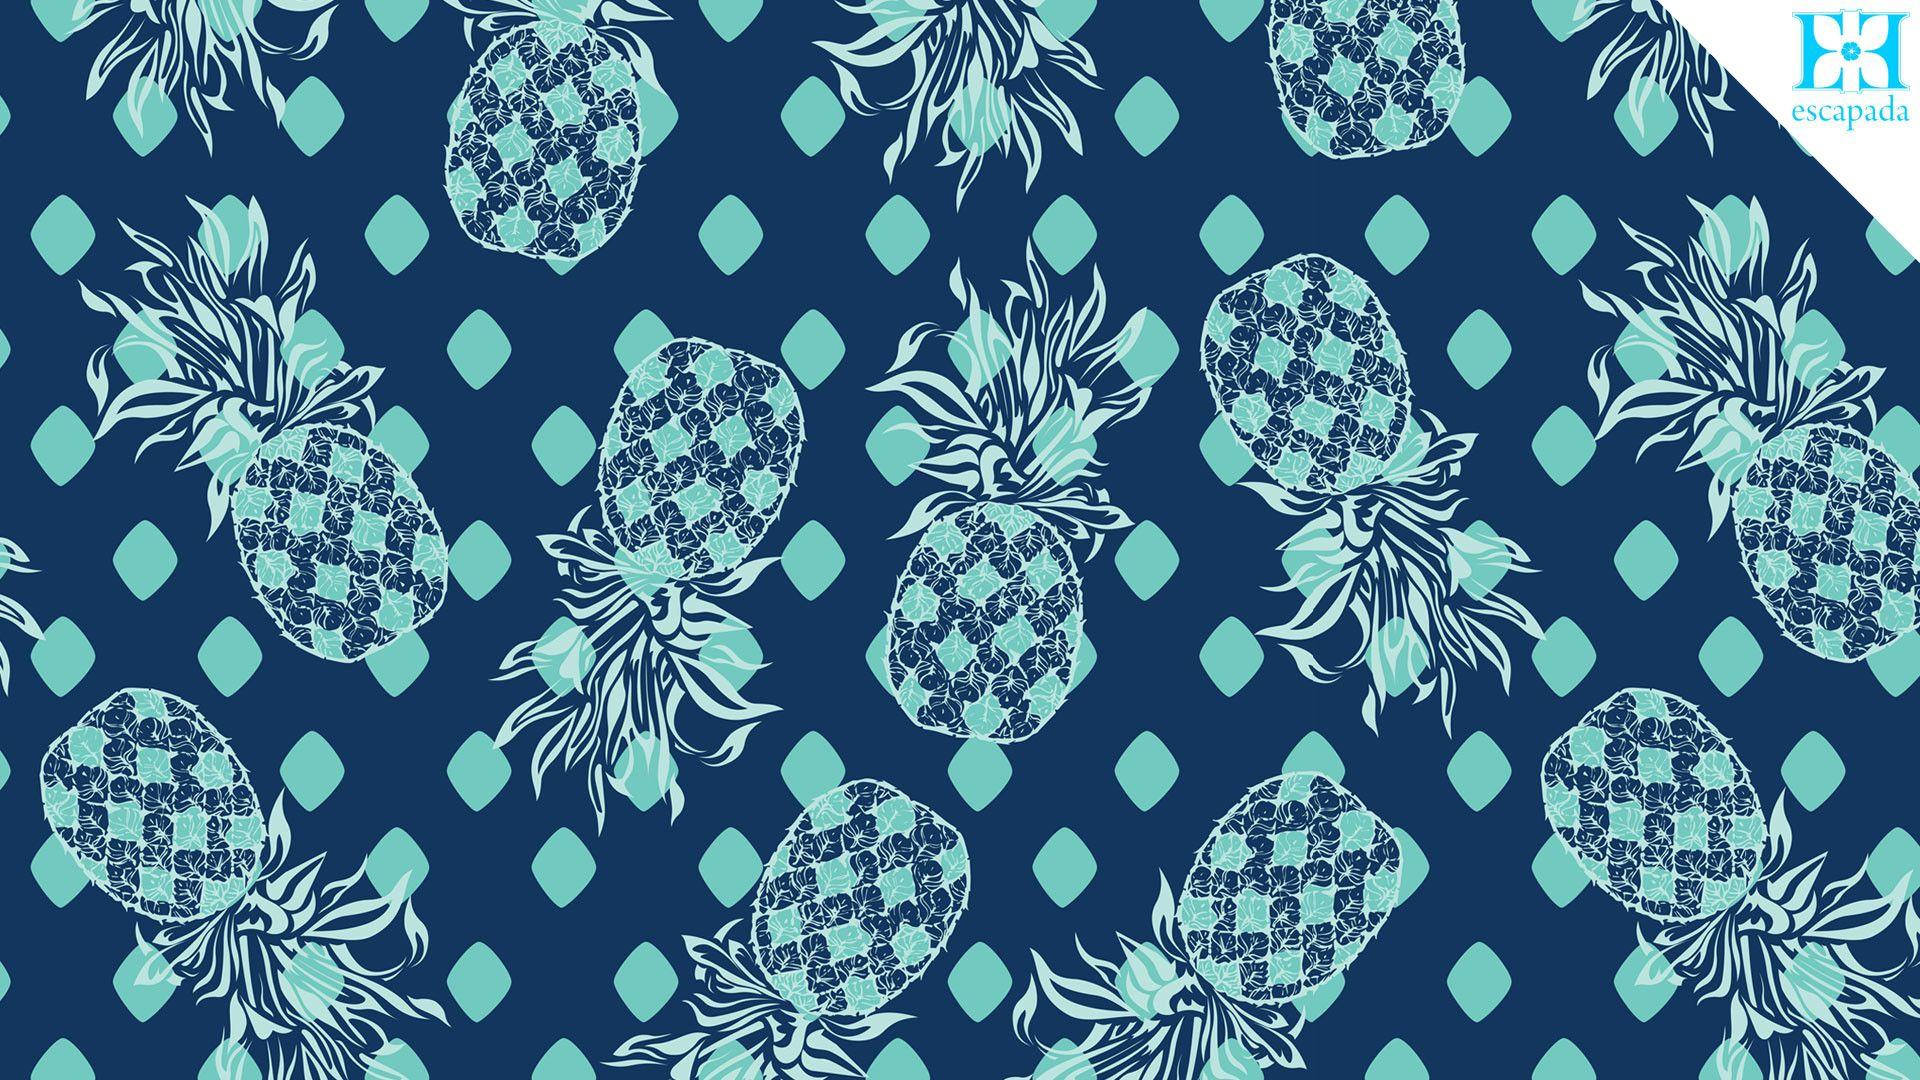 Free preppy background made by Evie Tags preppy cute background  picsart freetoedit  Preppy wallpaper Iphone wallpaper preppy Laptop  wallpaper